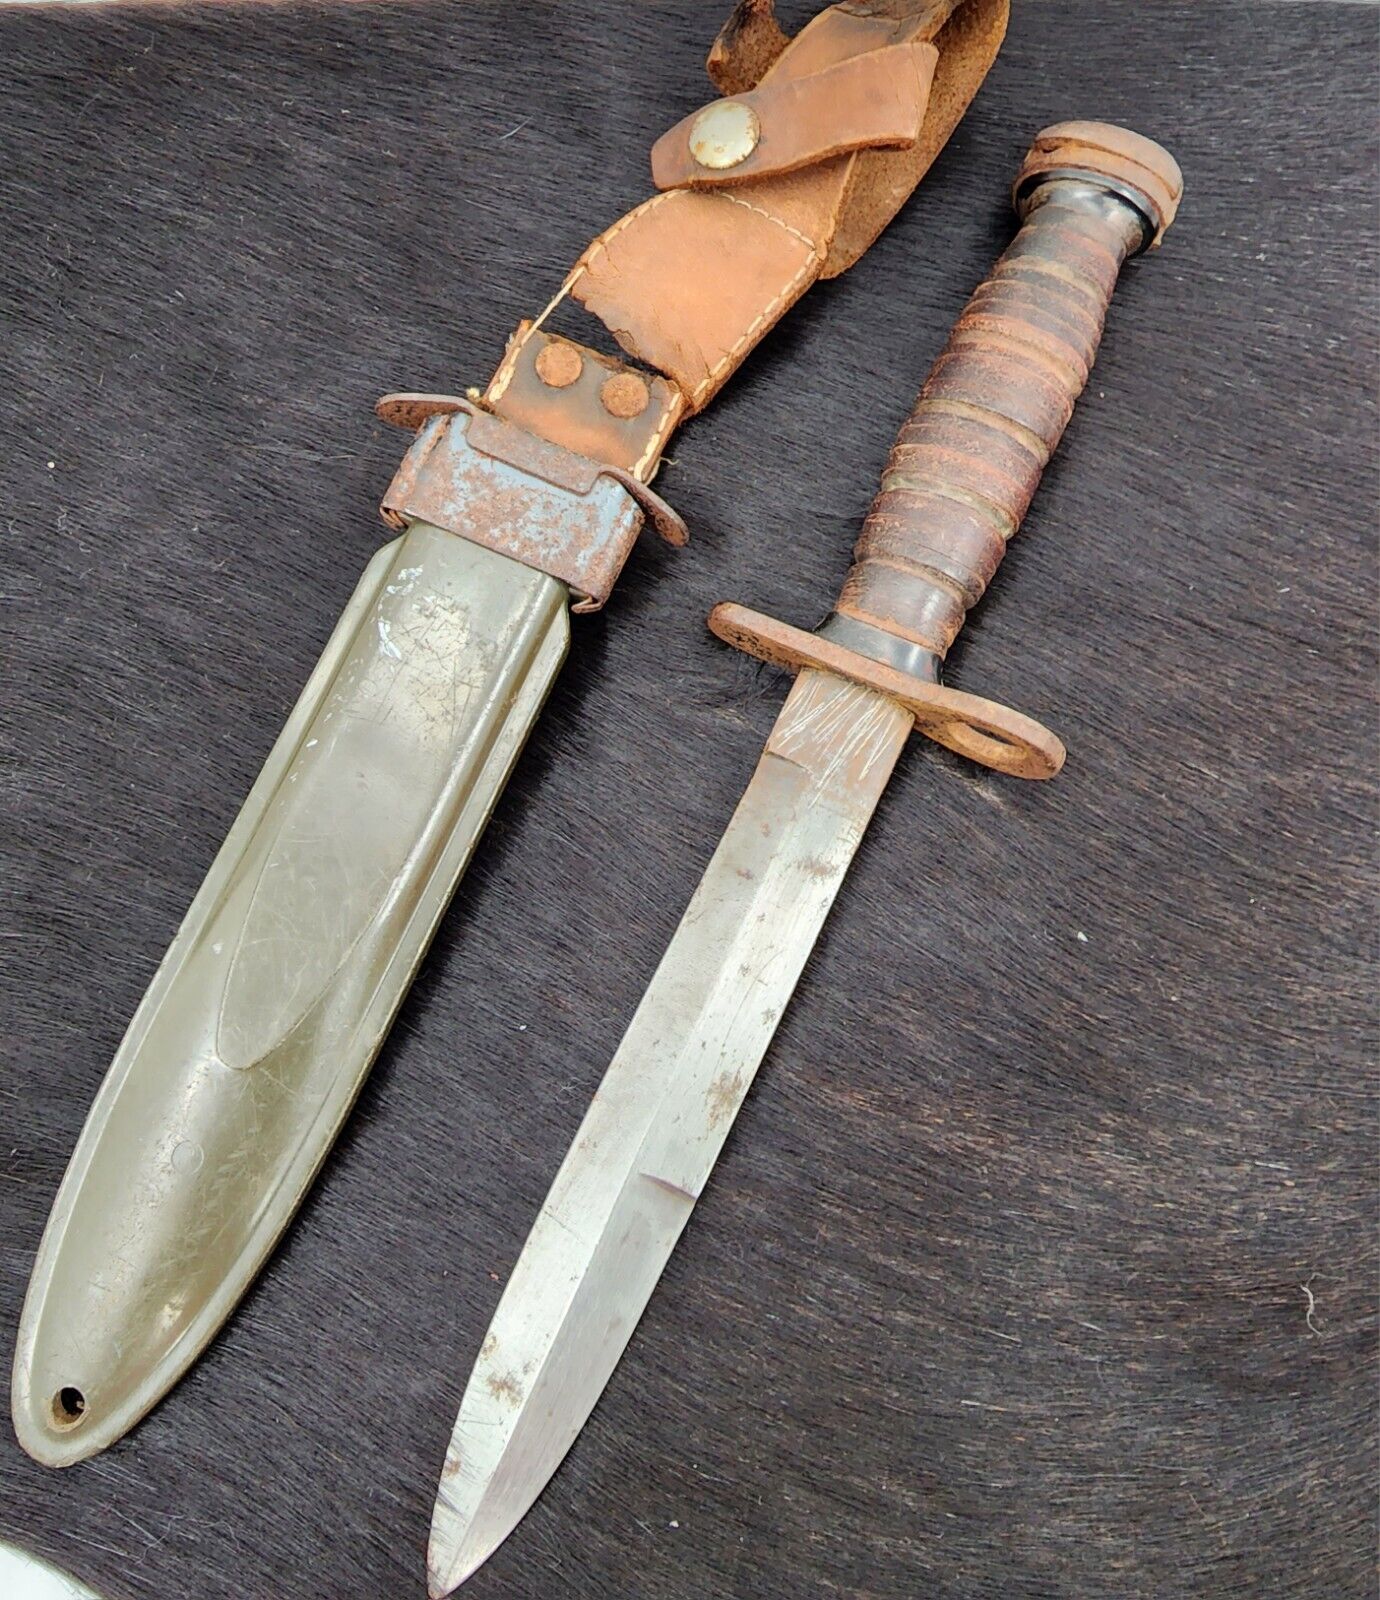 Vintage M1 carbine style bayonet made in Japan with sheath and leather handle